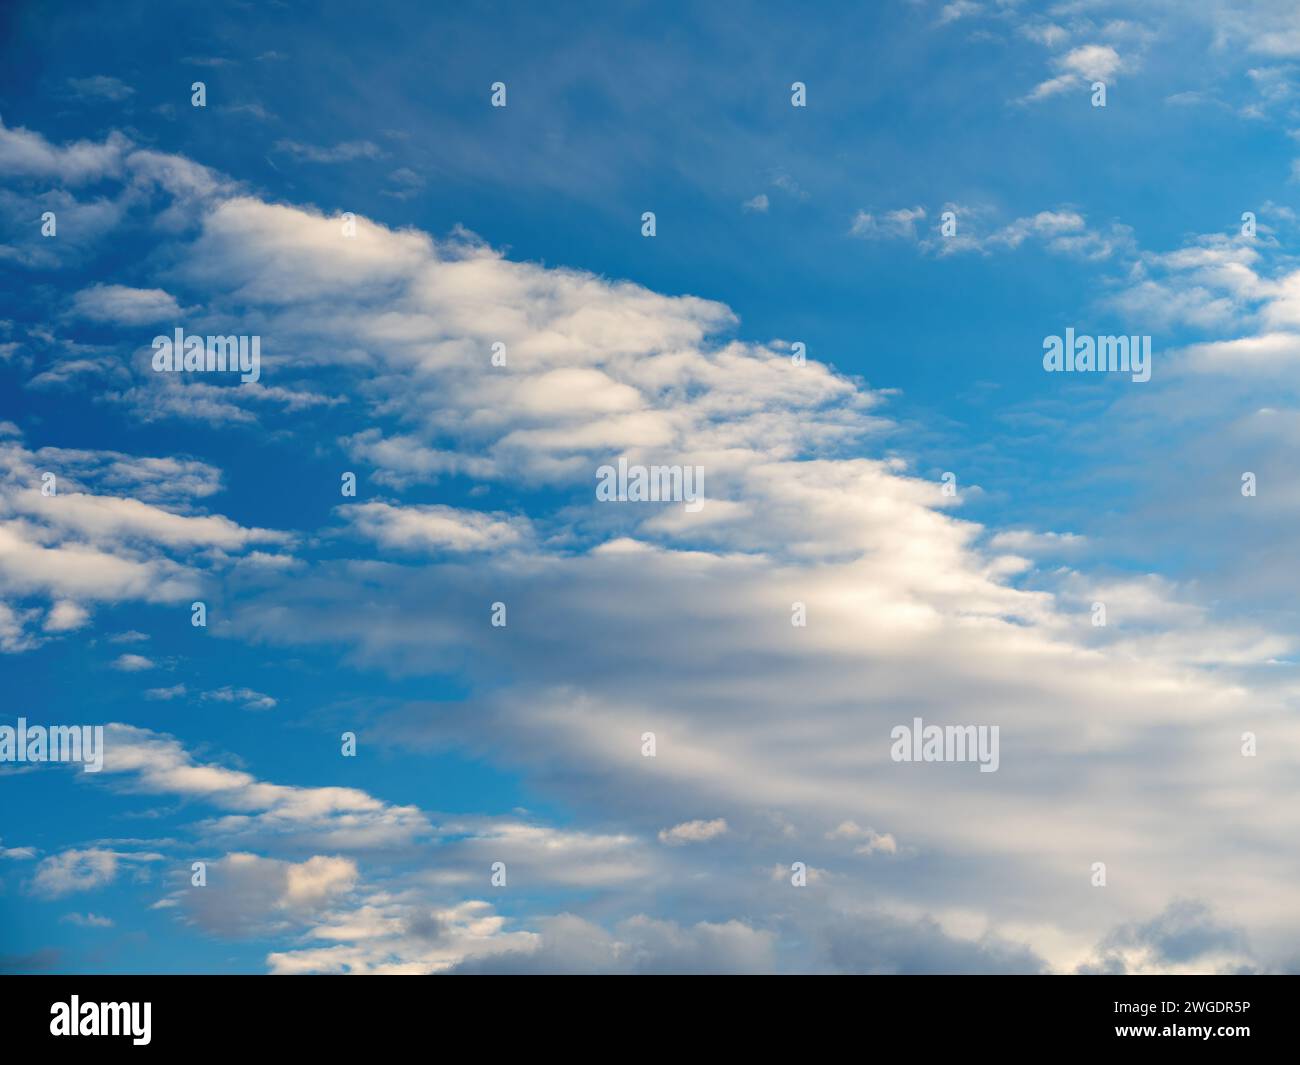 Cloudscape with blue sky and white clouds Stock Photo